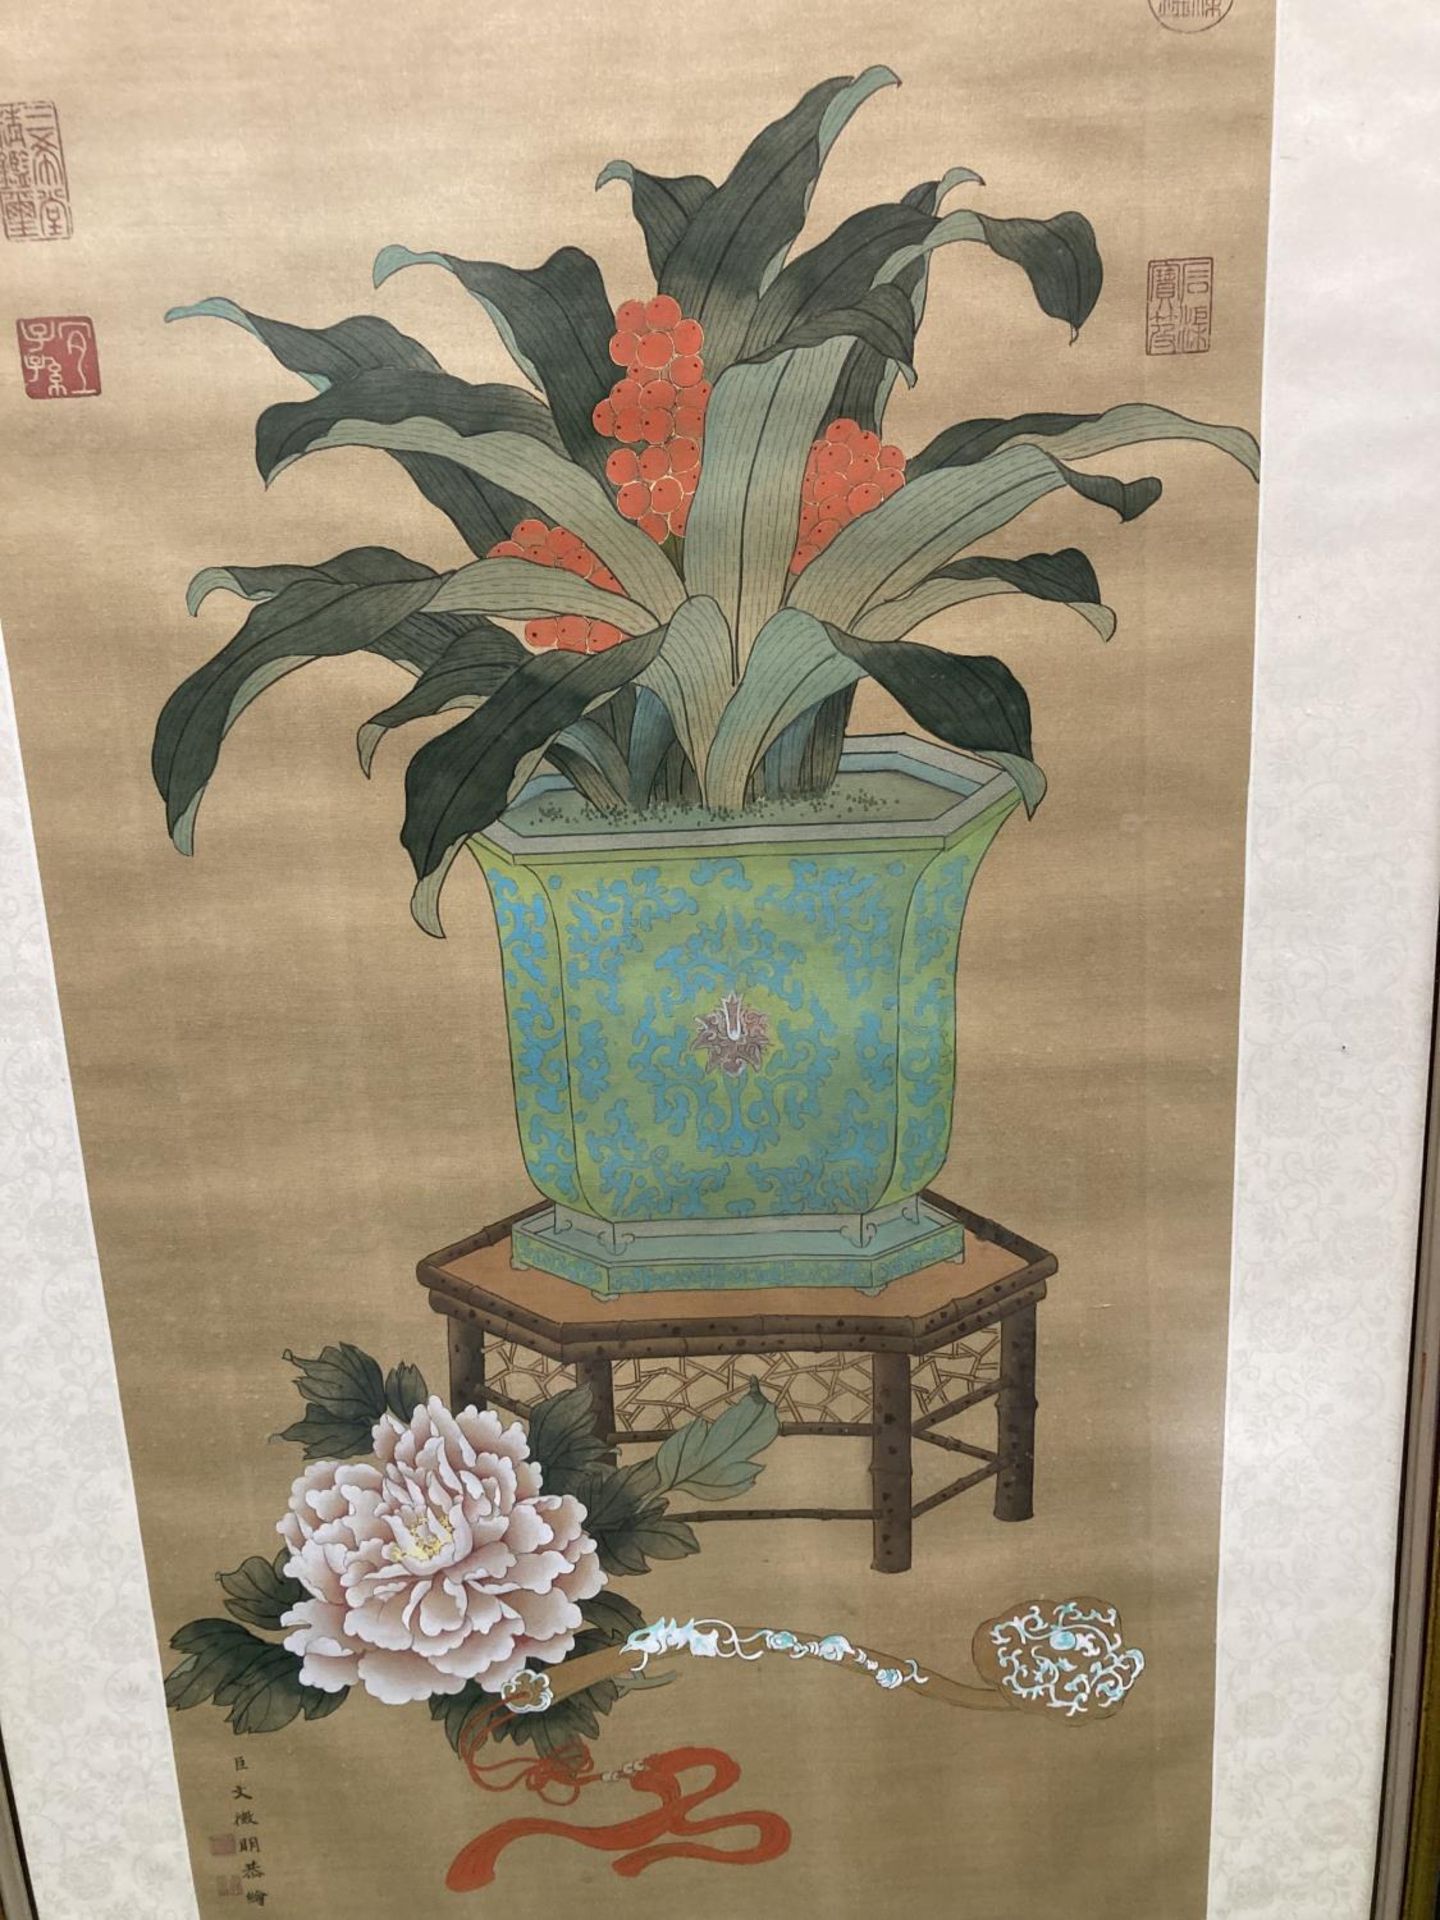 A LARGE FRAMED ORIENTAL PRINT OF A VASE WITH FLOWERS - Image 2 of 3